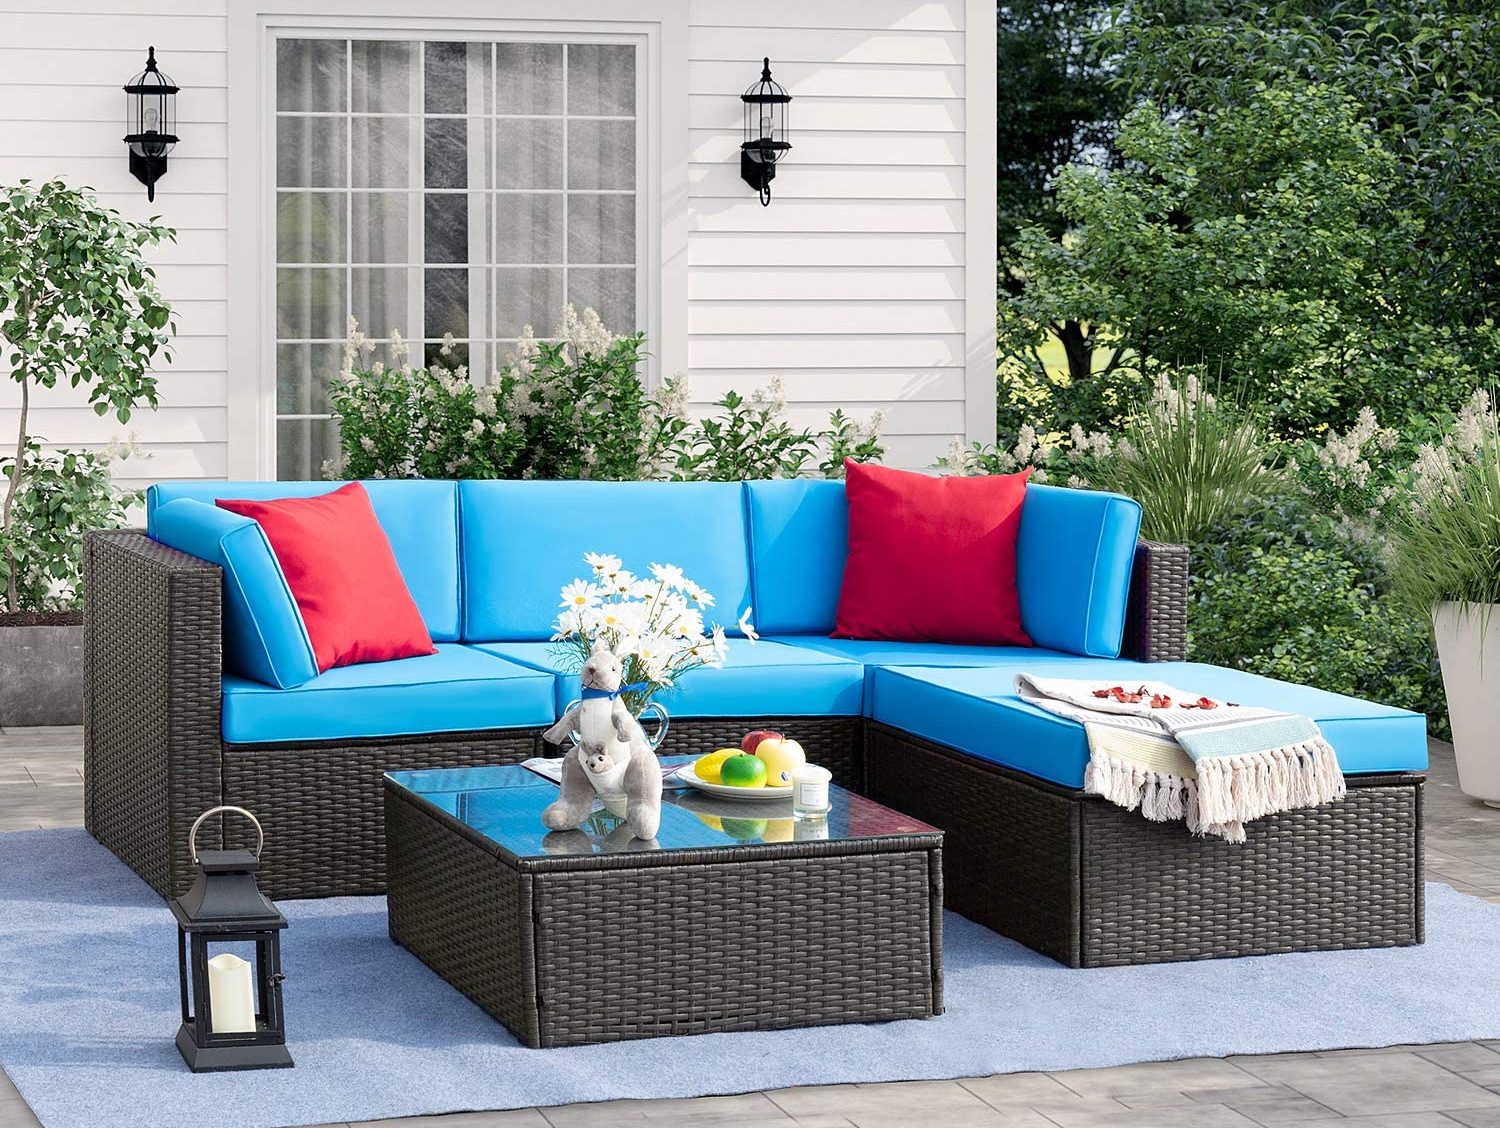 Best Outdoor Sectional Sofa Review | 2020 | Great Price ...